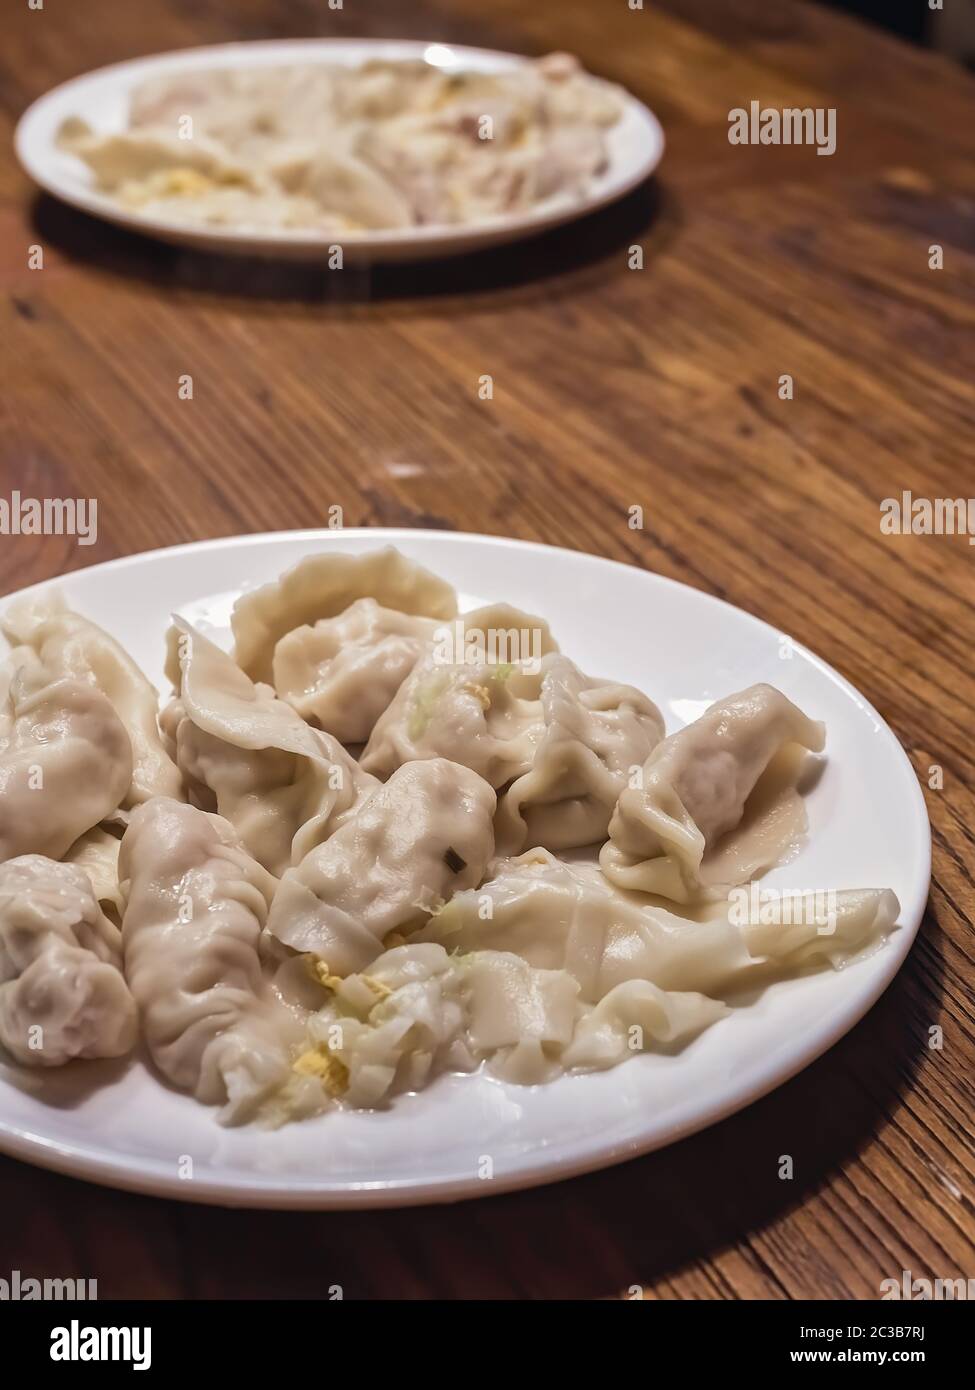 Plates of ready freshly cooked dumplings made during chinese dumpling making and cooking class in a travelers hostel, Chengdu, Sichuan Province, China Stock Photo